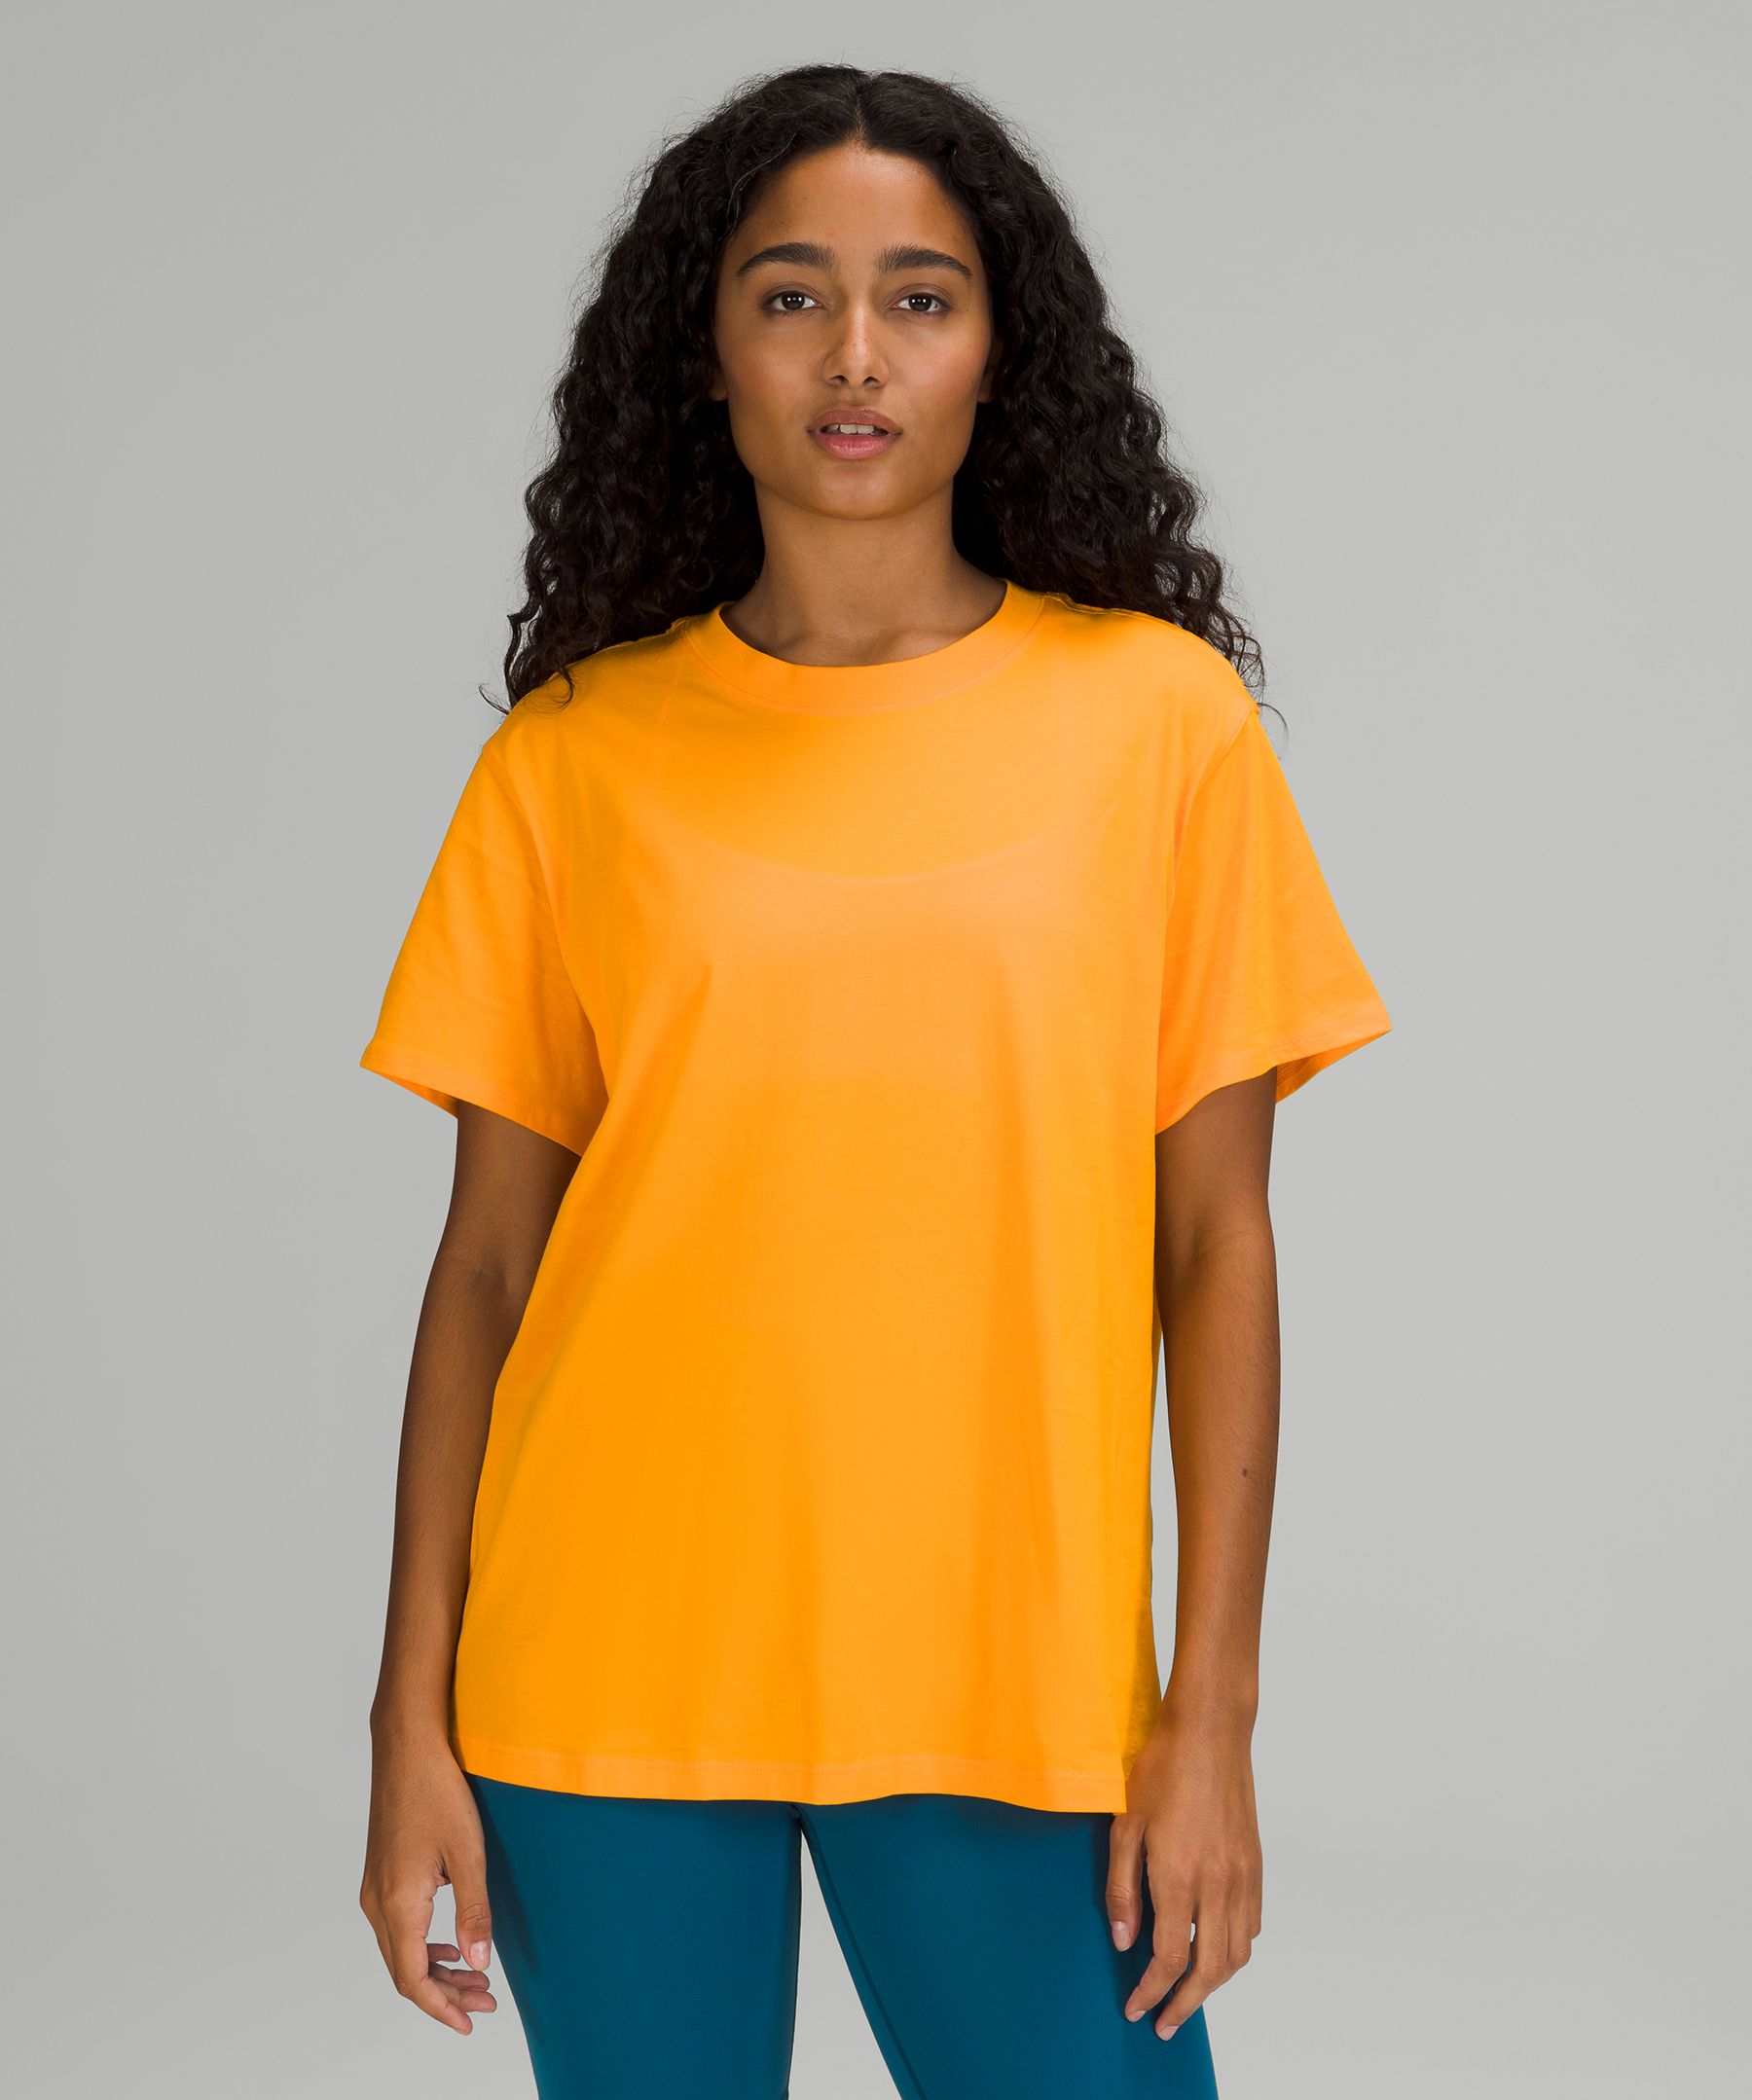 Lululemon All Yours Short Sleeve T-shirt In Clementine